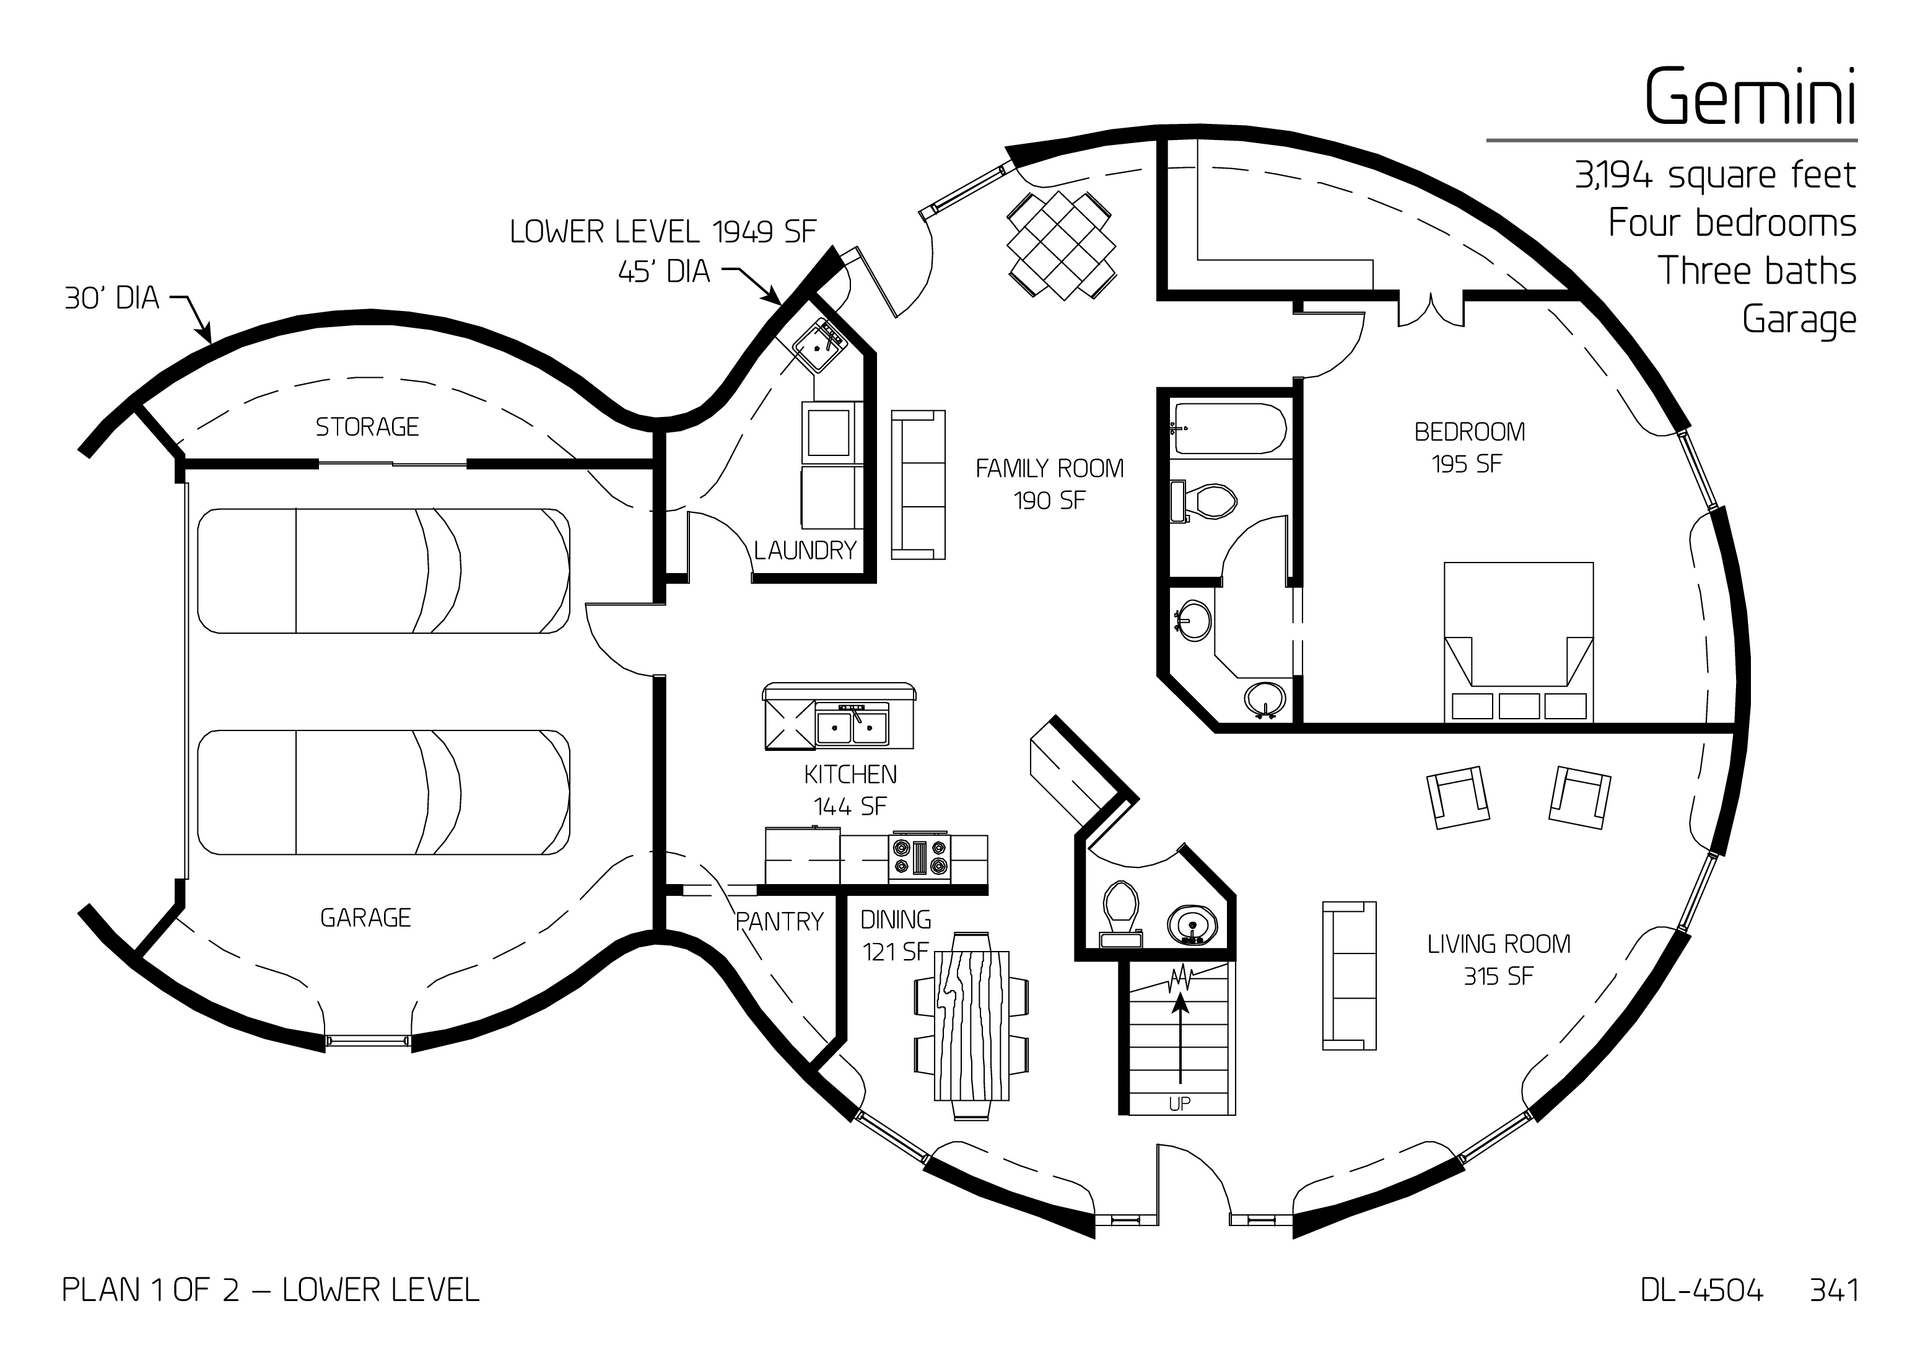 Gemini: Main Floor of a 30' and 45' Diameter Double Dome, 3,194 SF, Four-Bedroom, Two and a Half-Bath Floor Plan.